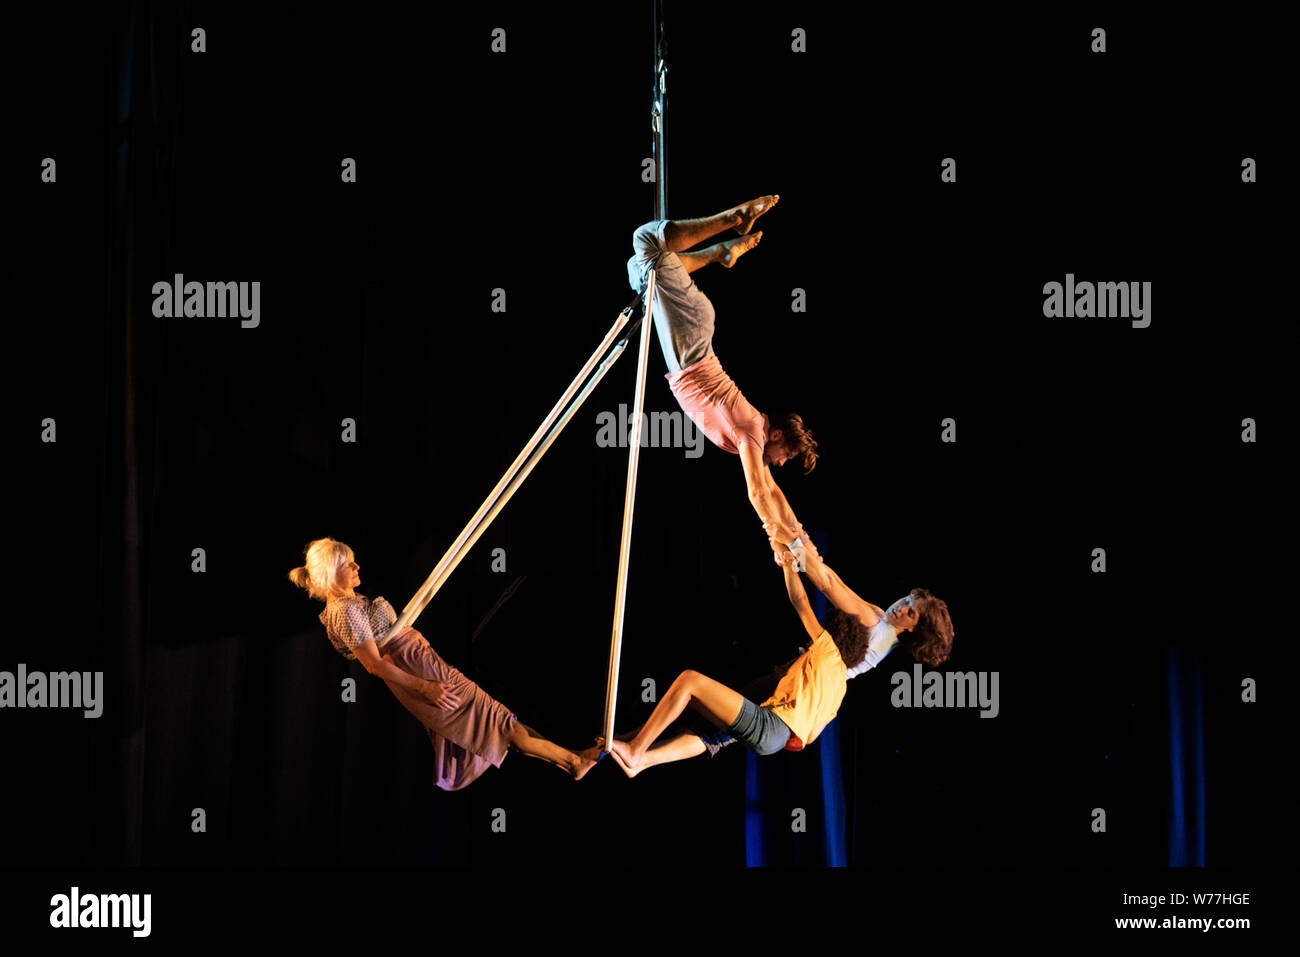 Edinburgh, Scotland, UK. 5 August 2019. Award winning Ockham's Razor perform their show This Time,  a show about time, age and the stories we tell ourselves. With a cast ranging in age from 3 to 60 the show looks at perceptions of strength and age.  Iain Masterton/Alamy Live News Stock Photo